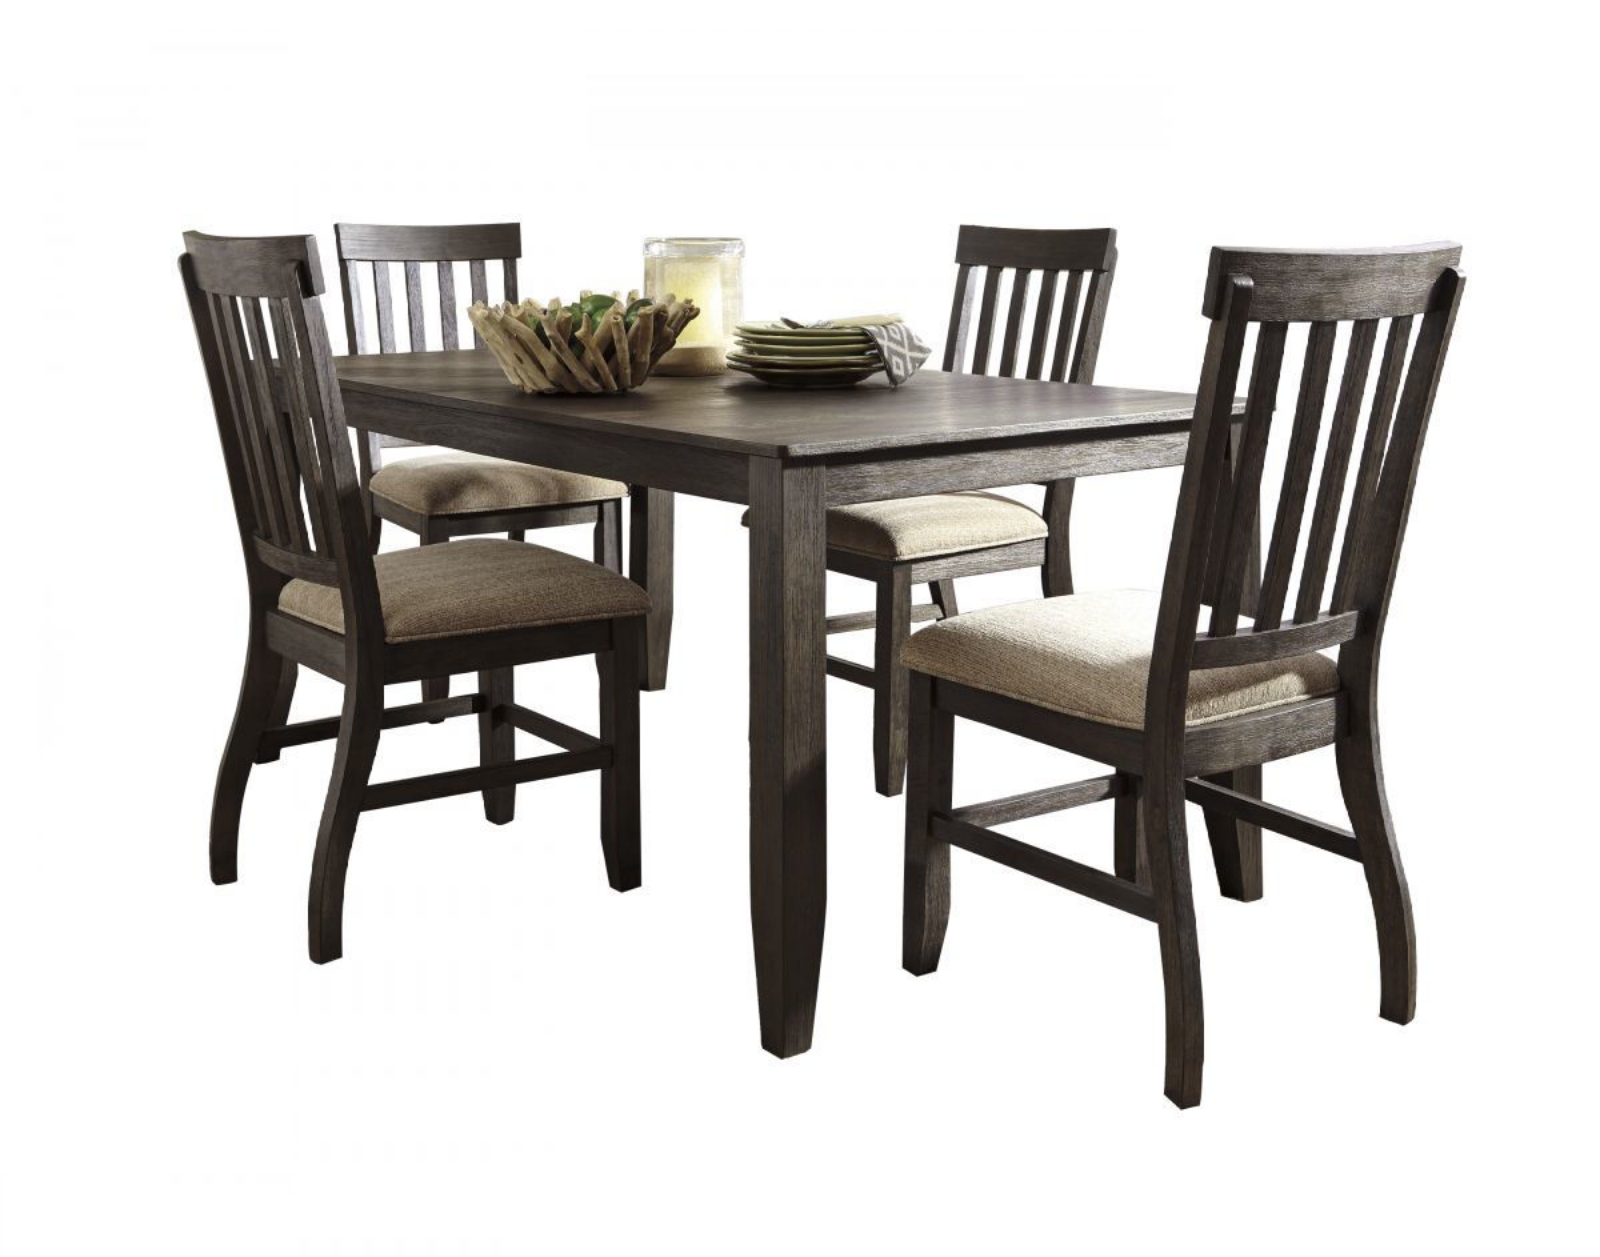 Picture of Dresbar Table & 4 Chairs